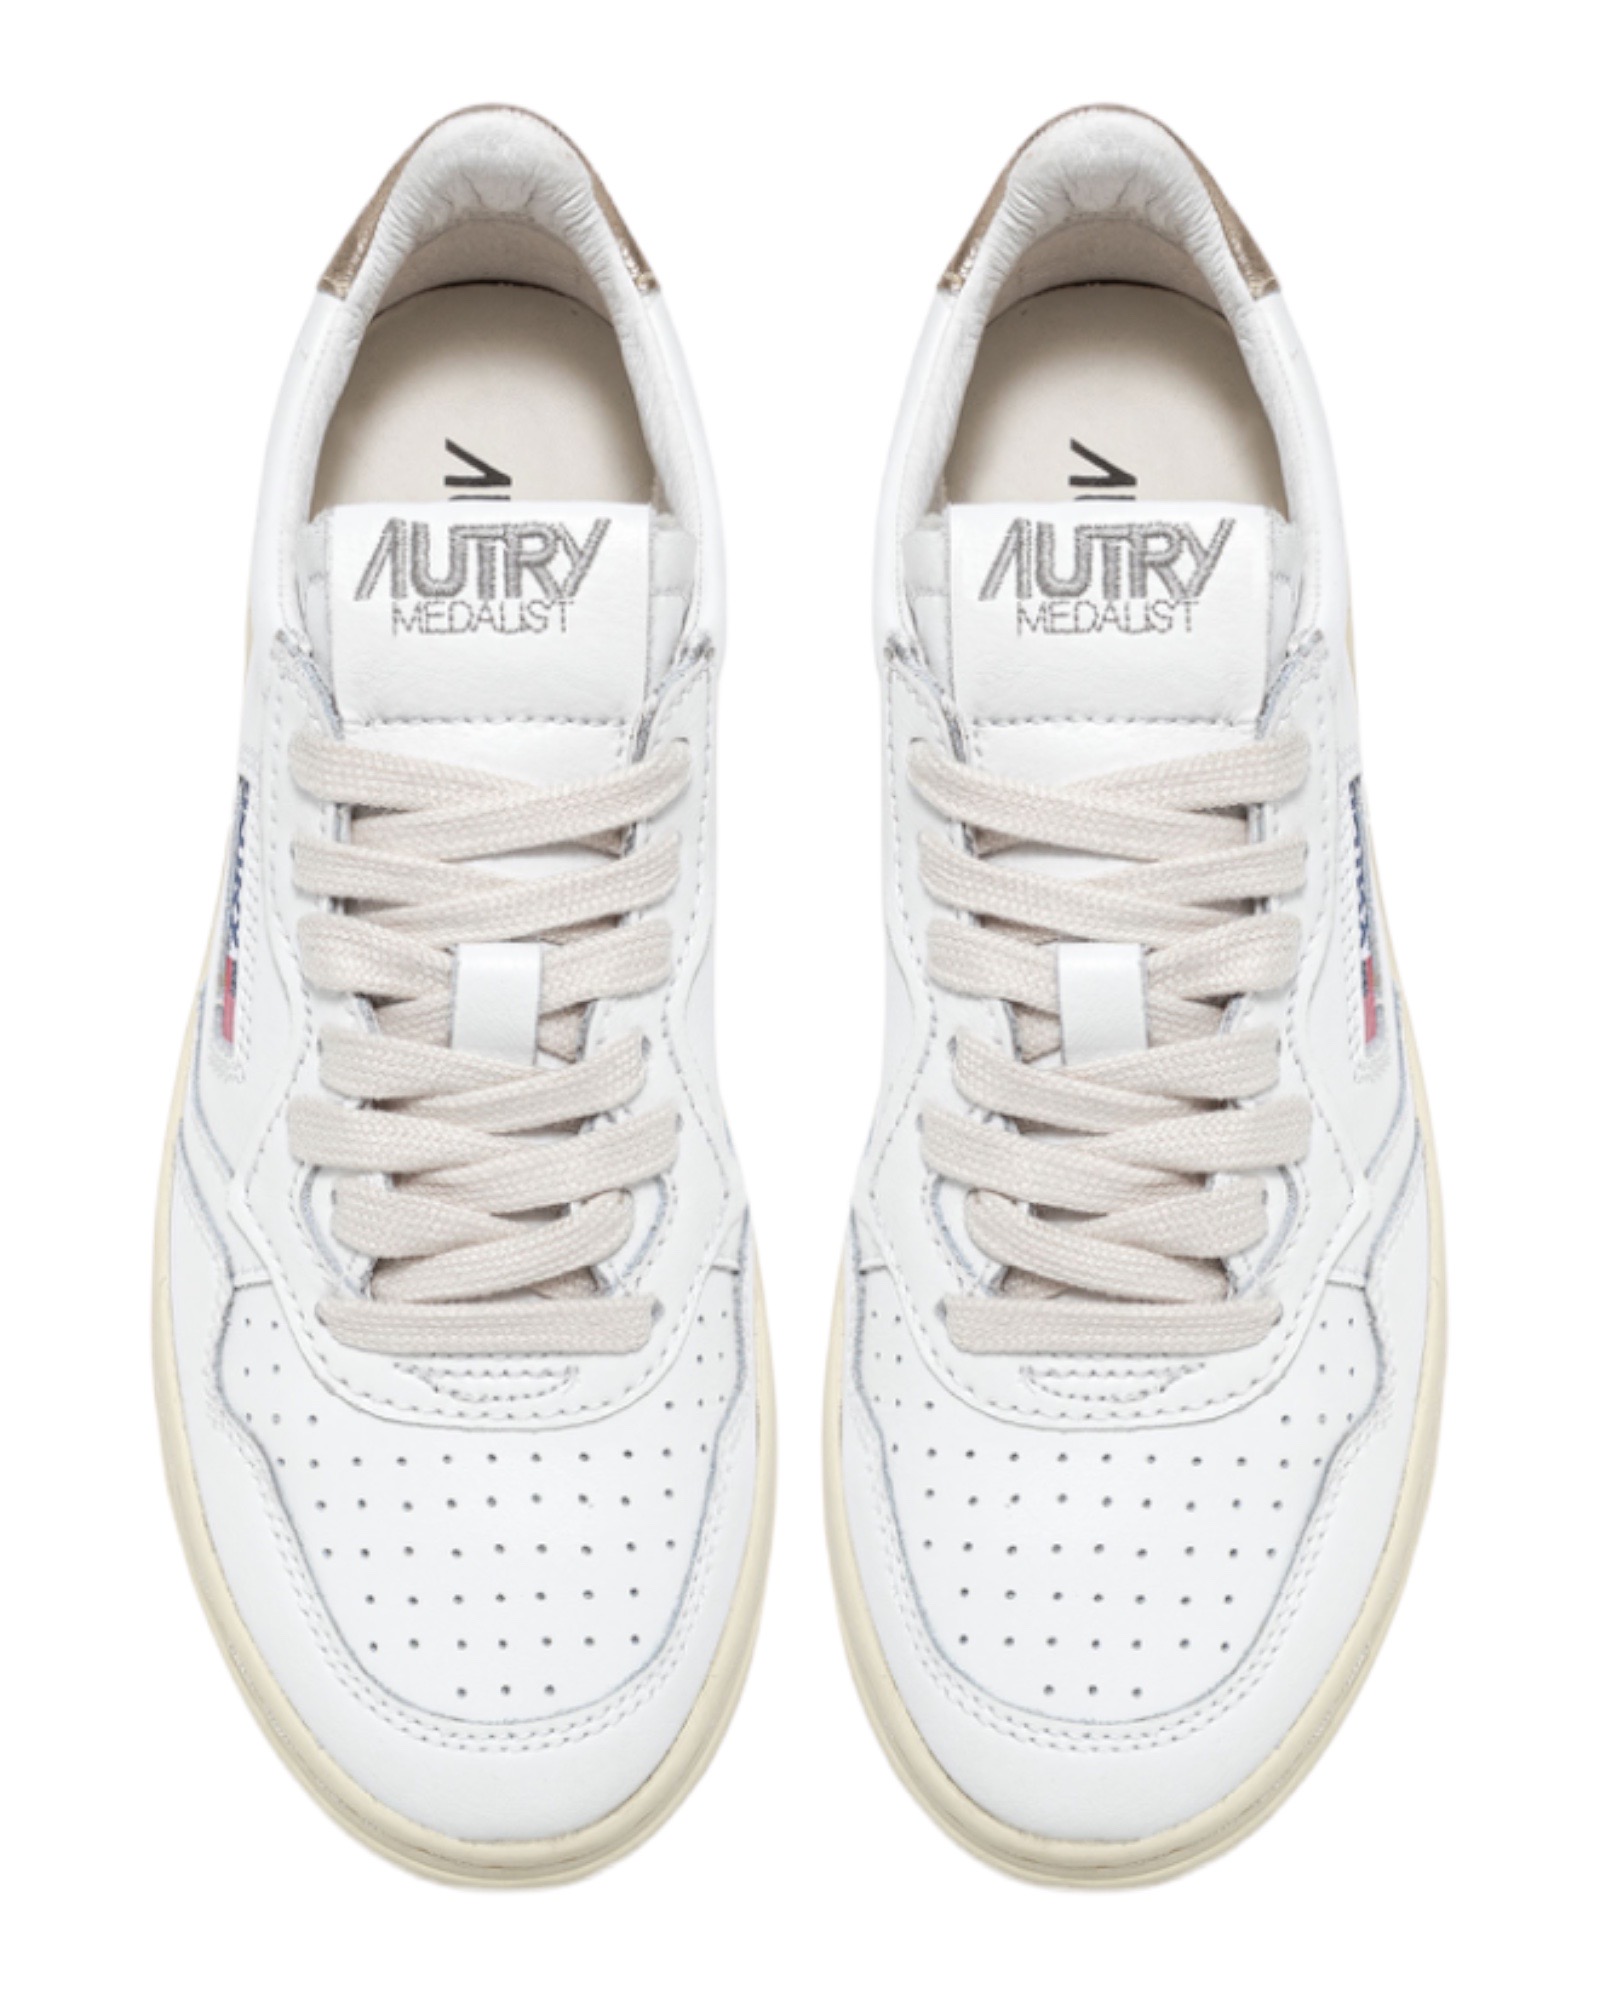 Sneaker, Medalist, low, white/gold, Autry, A12IAULWLL06